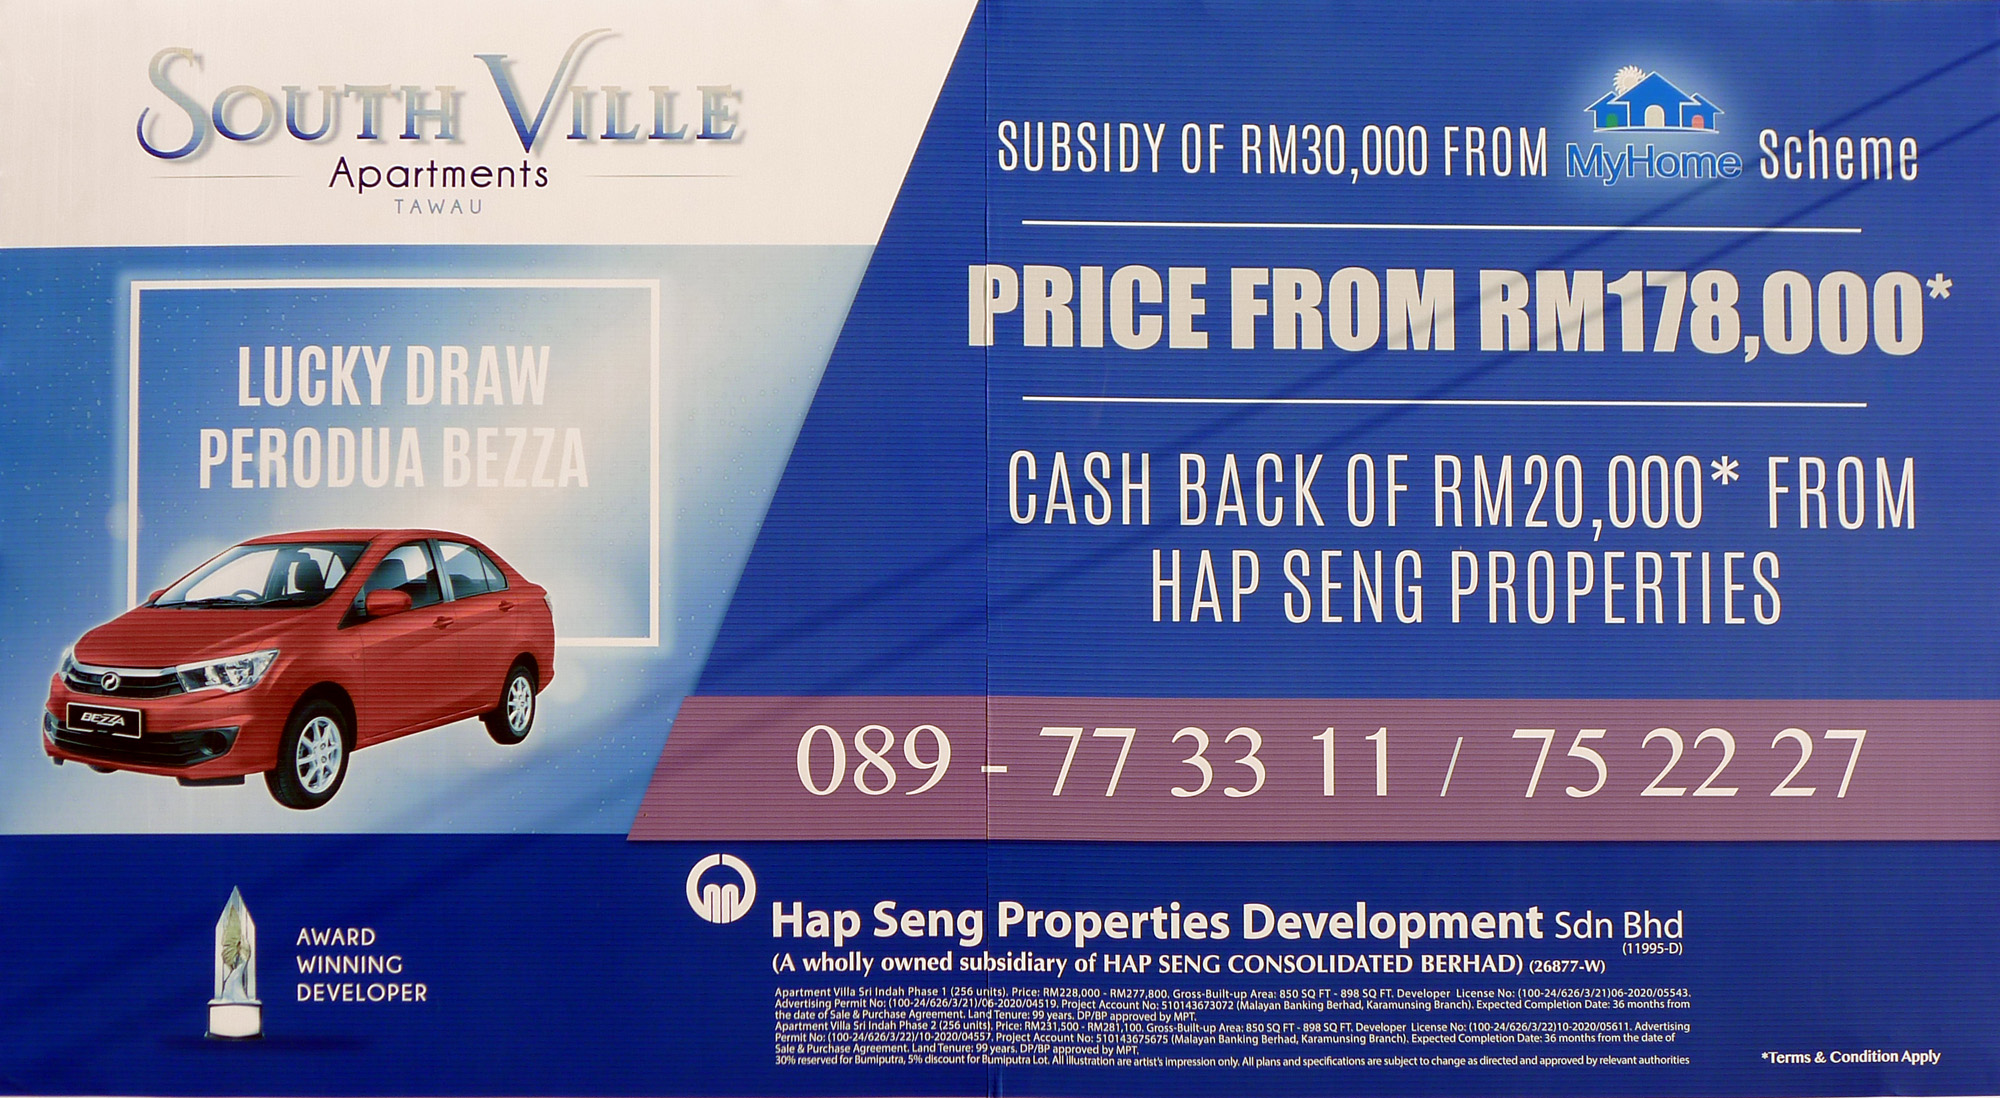 South Ville Apartments Price from Rm 178,000